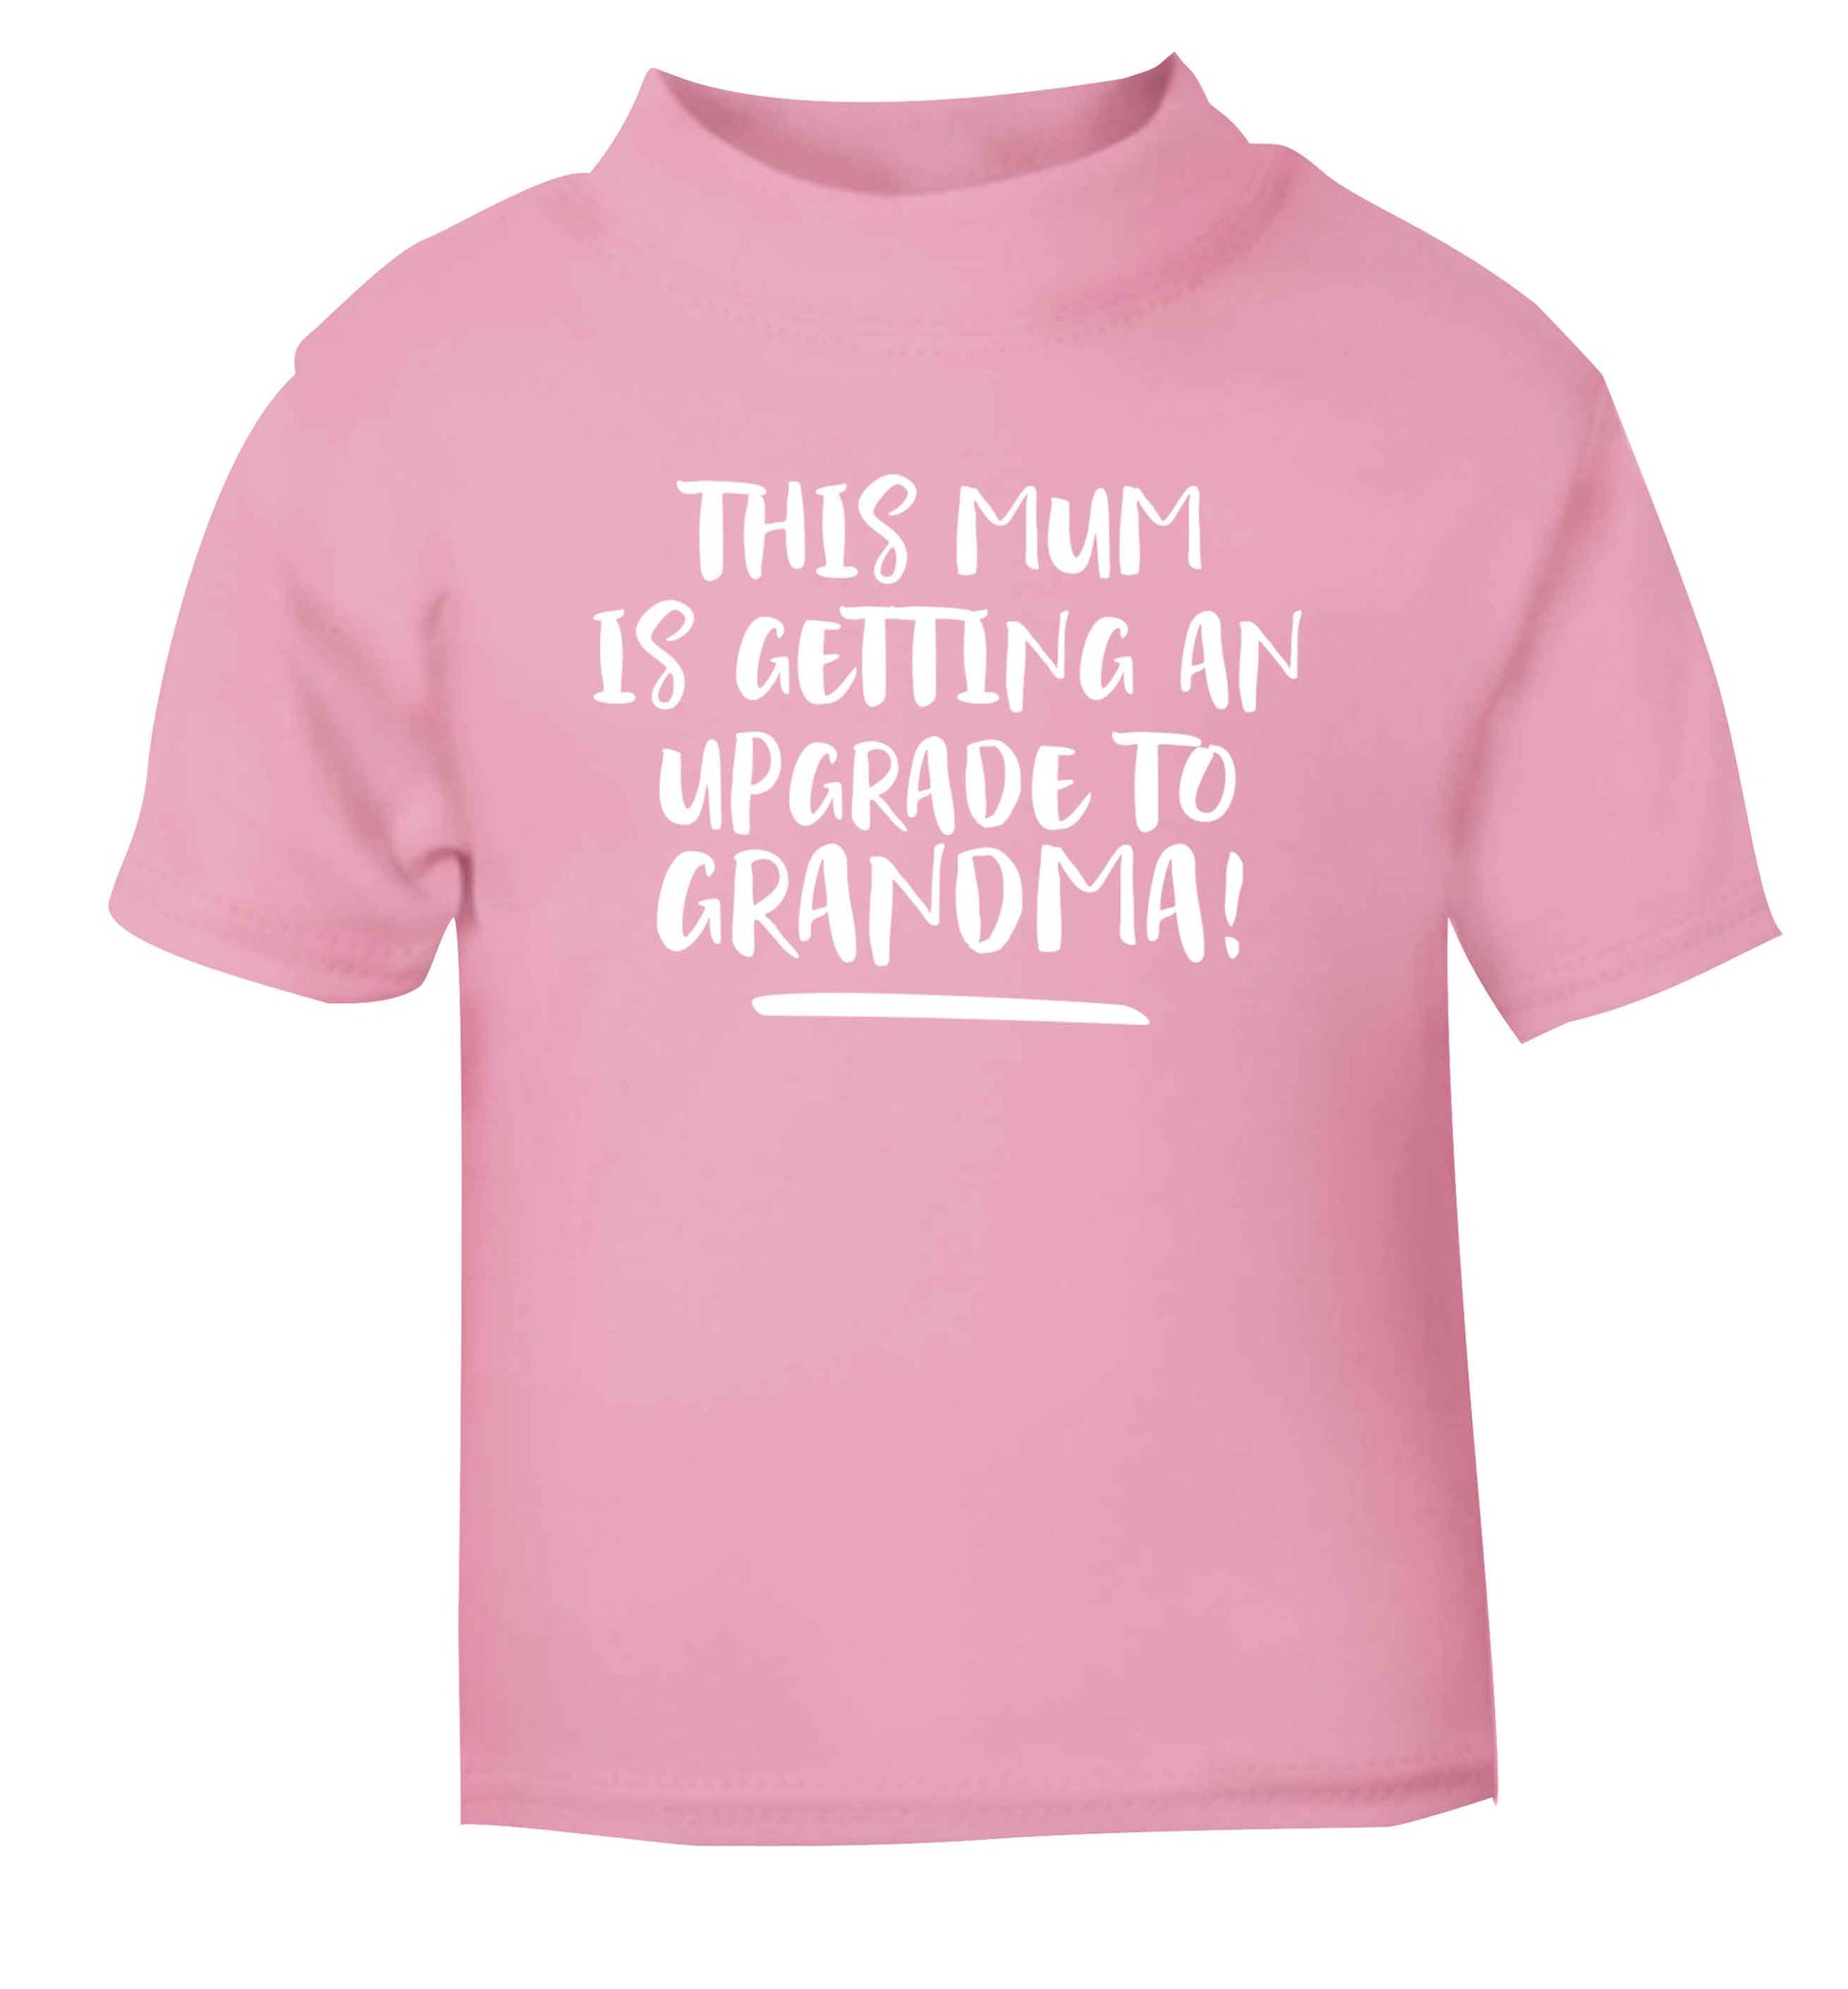 This mum is getting an upgrade to grandma! light pink Baby Toddler Tshirt 2 Years